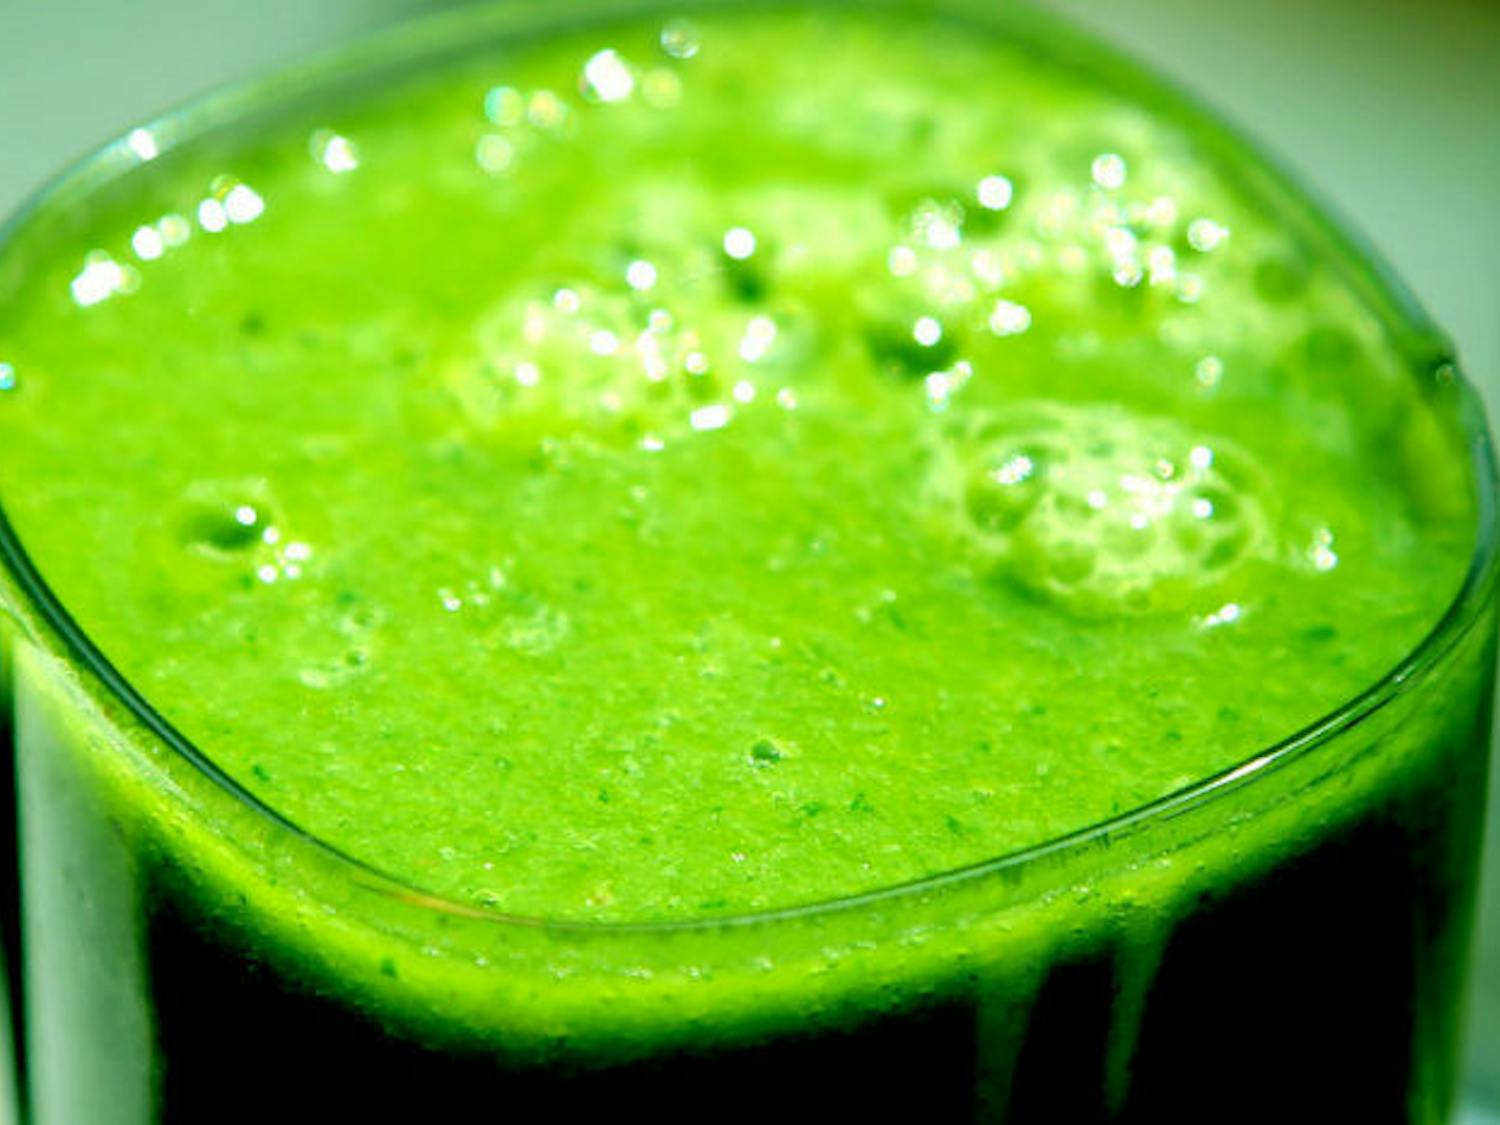 "green-smoothie" by Joanna Slodownik, used under CC BY 2.0